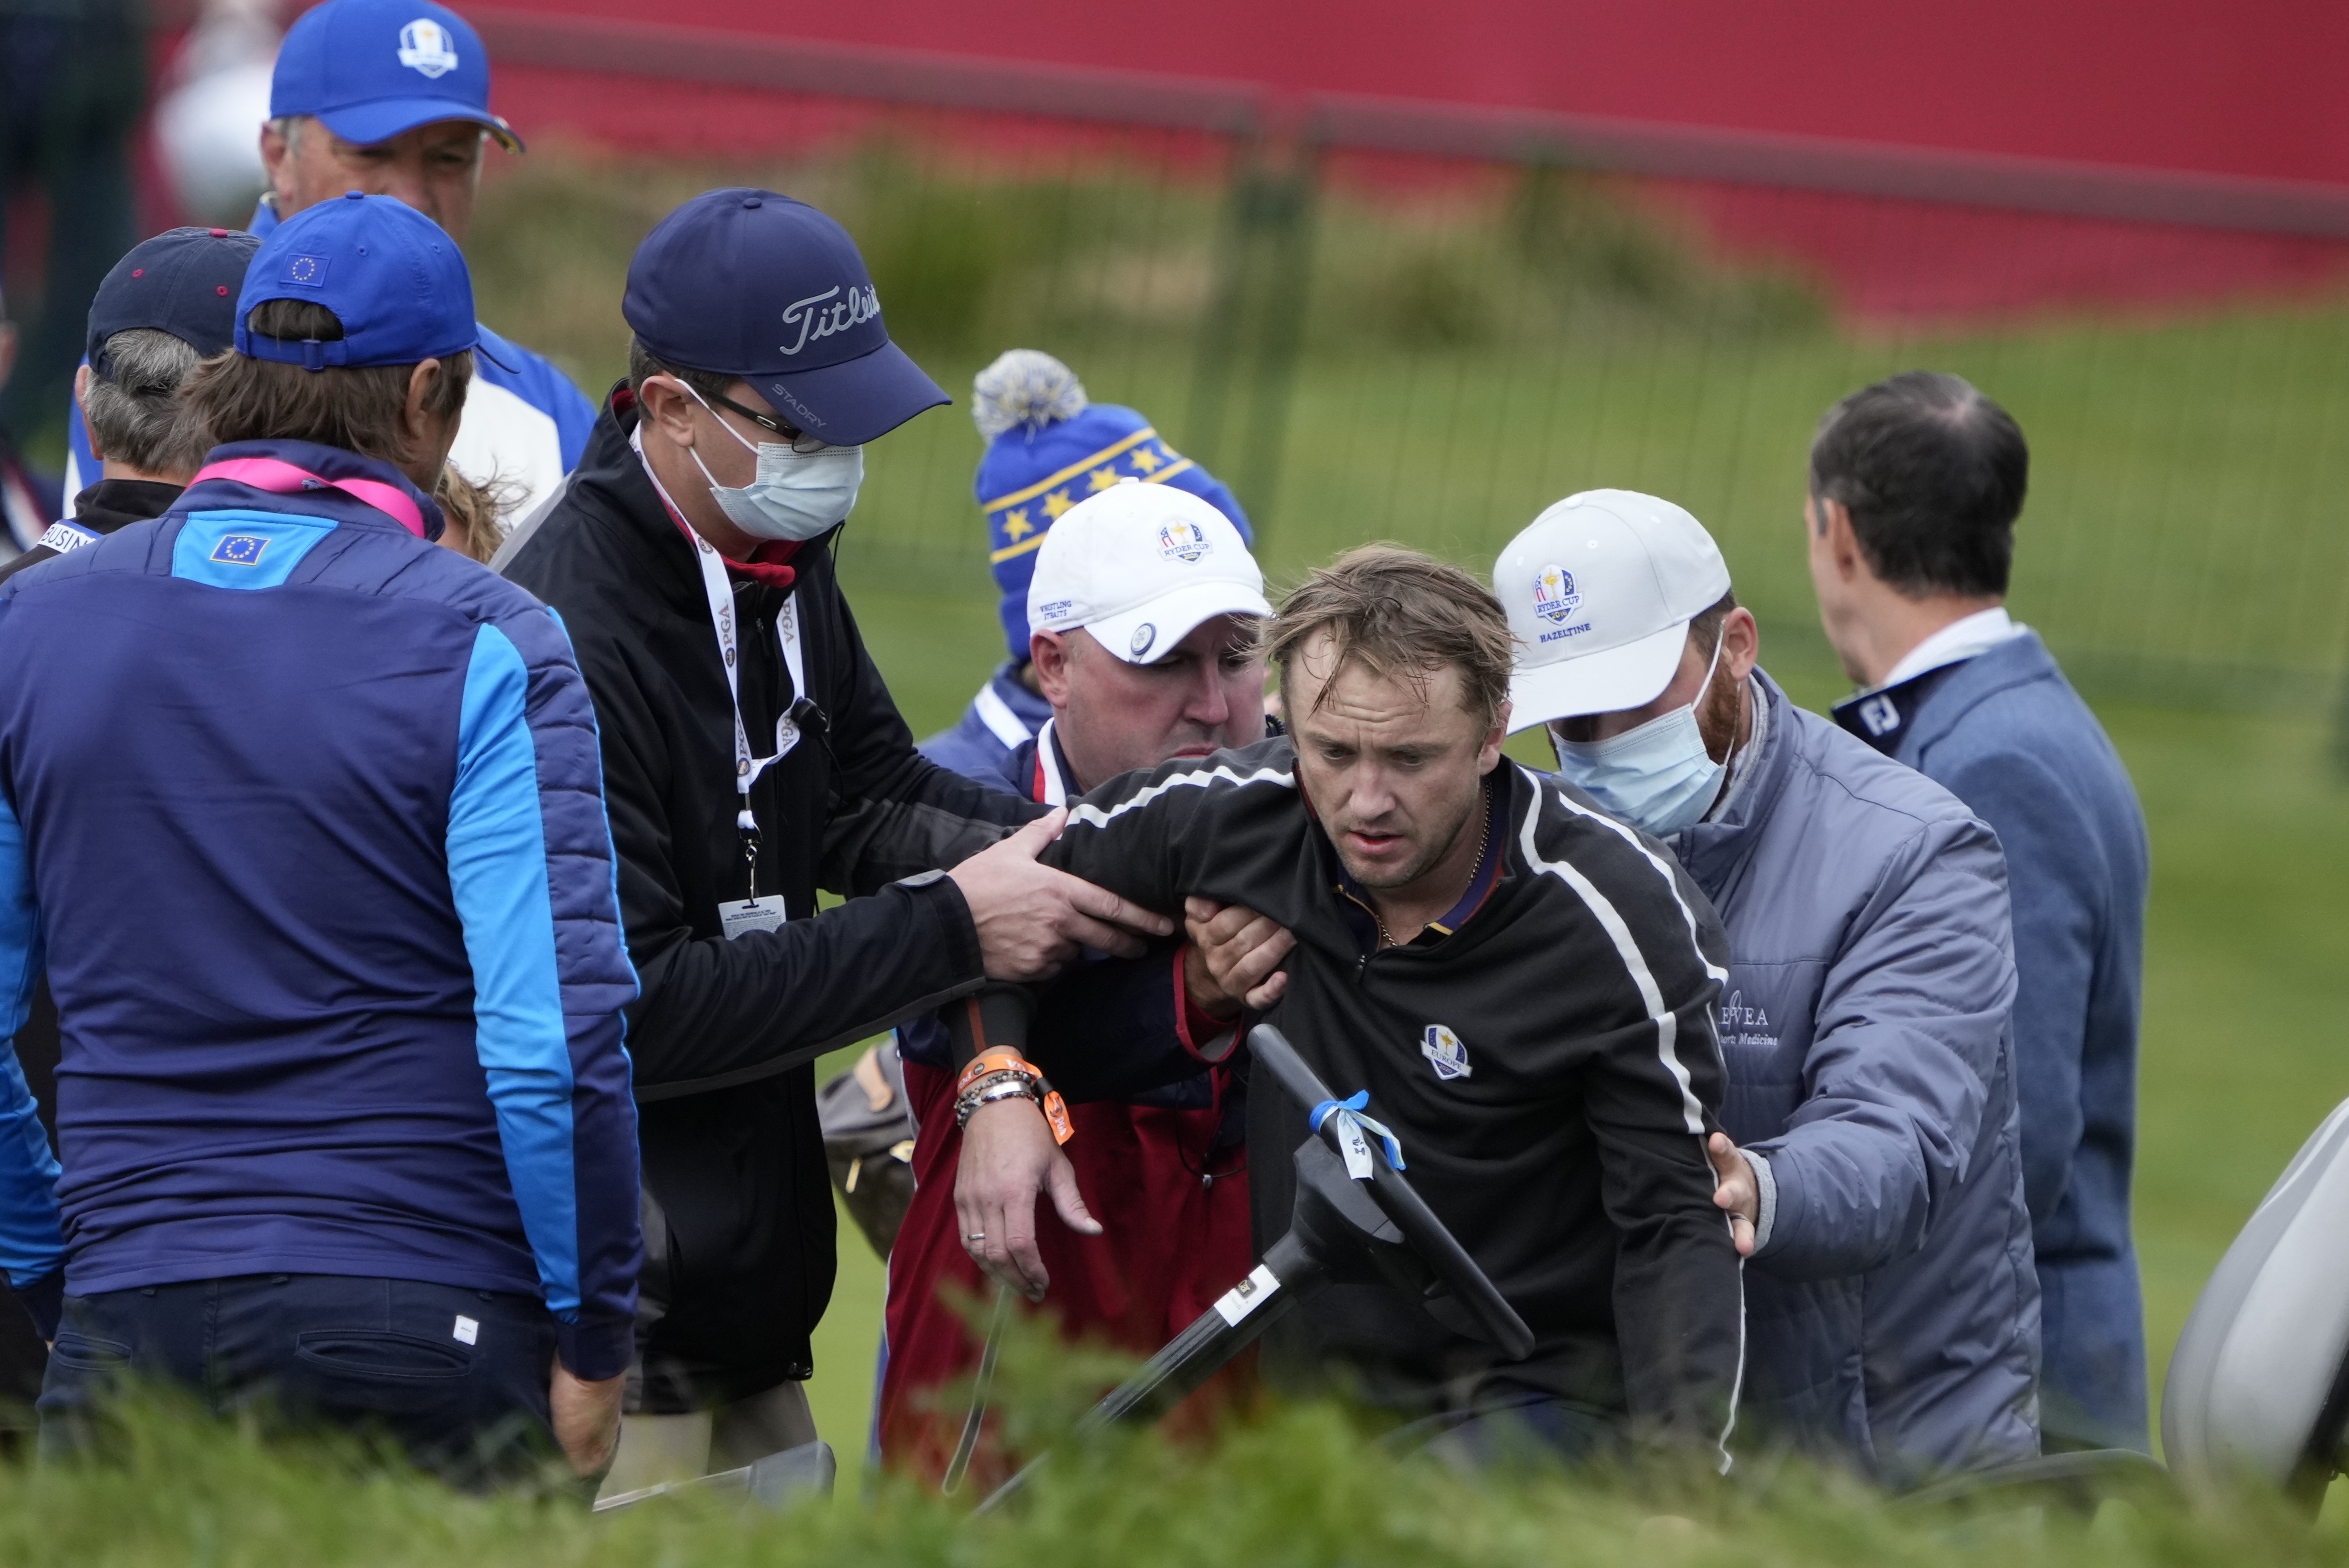 Tom Felton of ‘Harry Potter' Fame Collapses at Ryder Cup